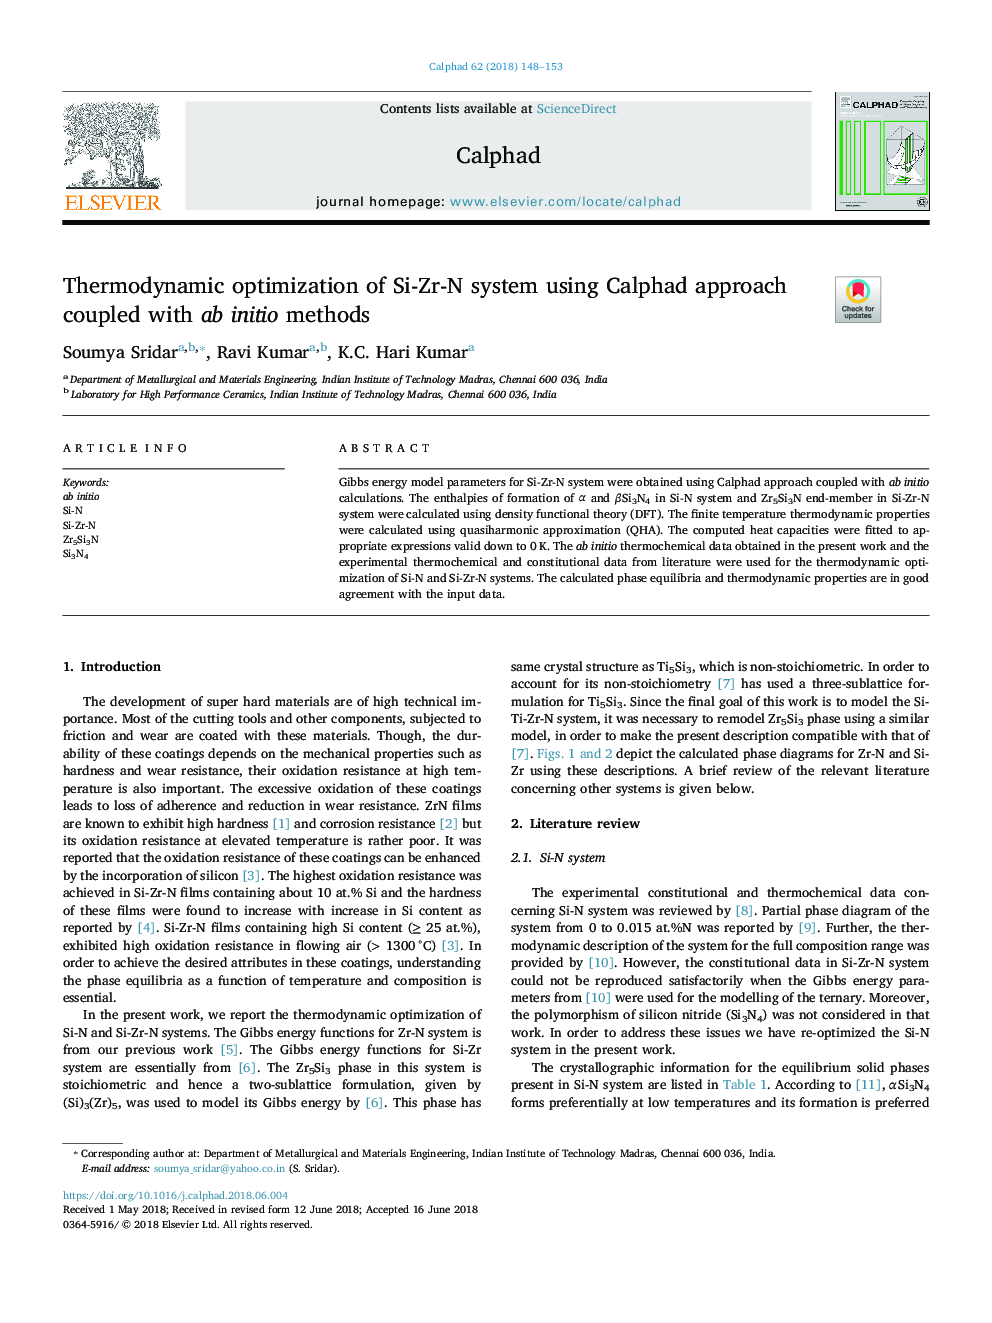 Thermodynamic optimization of Si-Zr-N system using Calphad approach coupled with ab initio methods